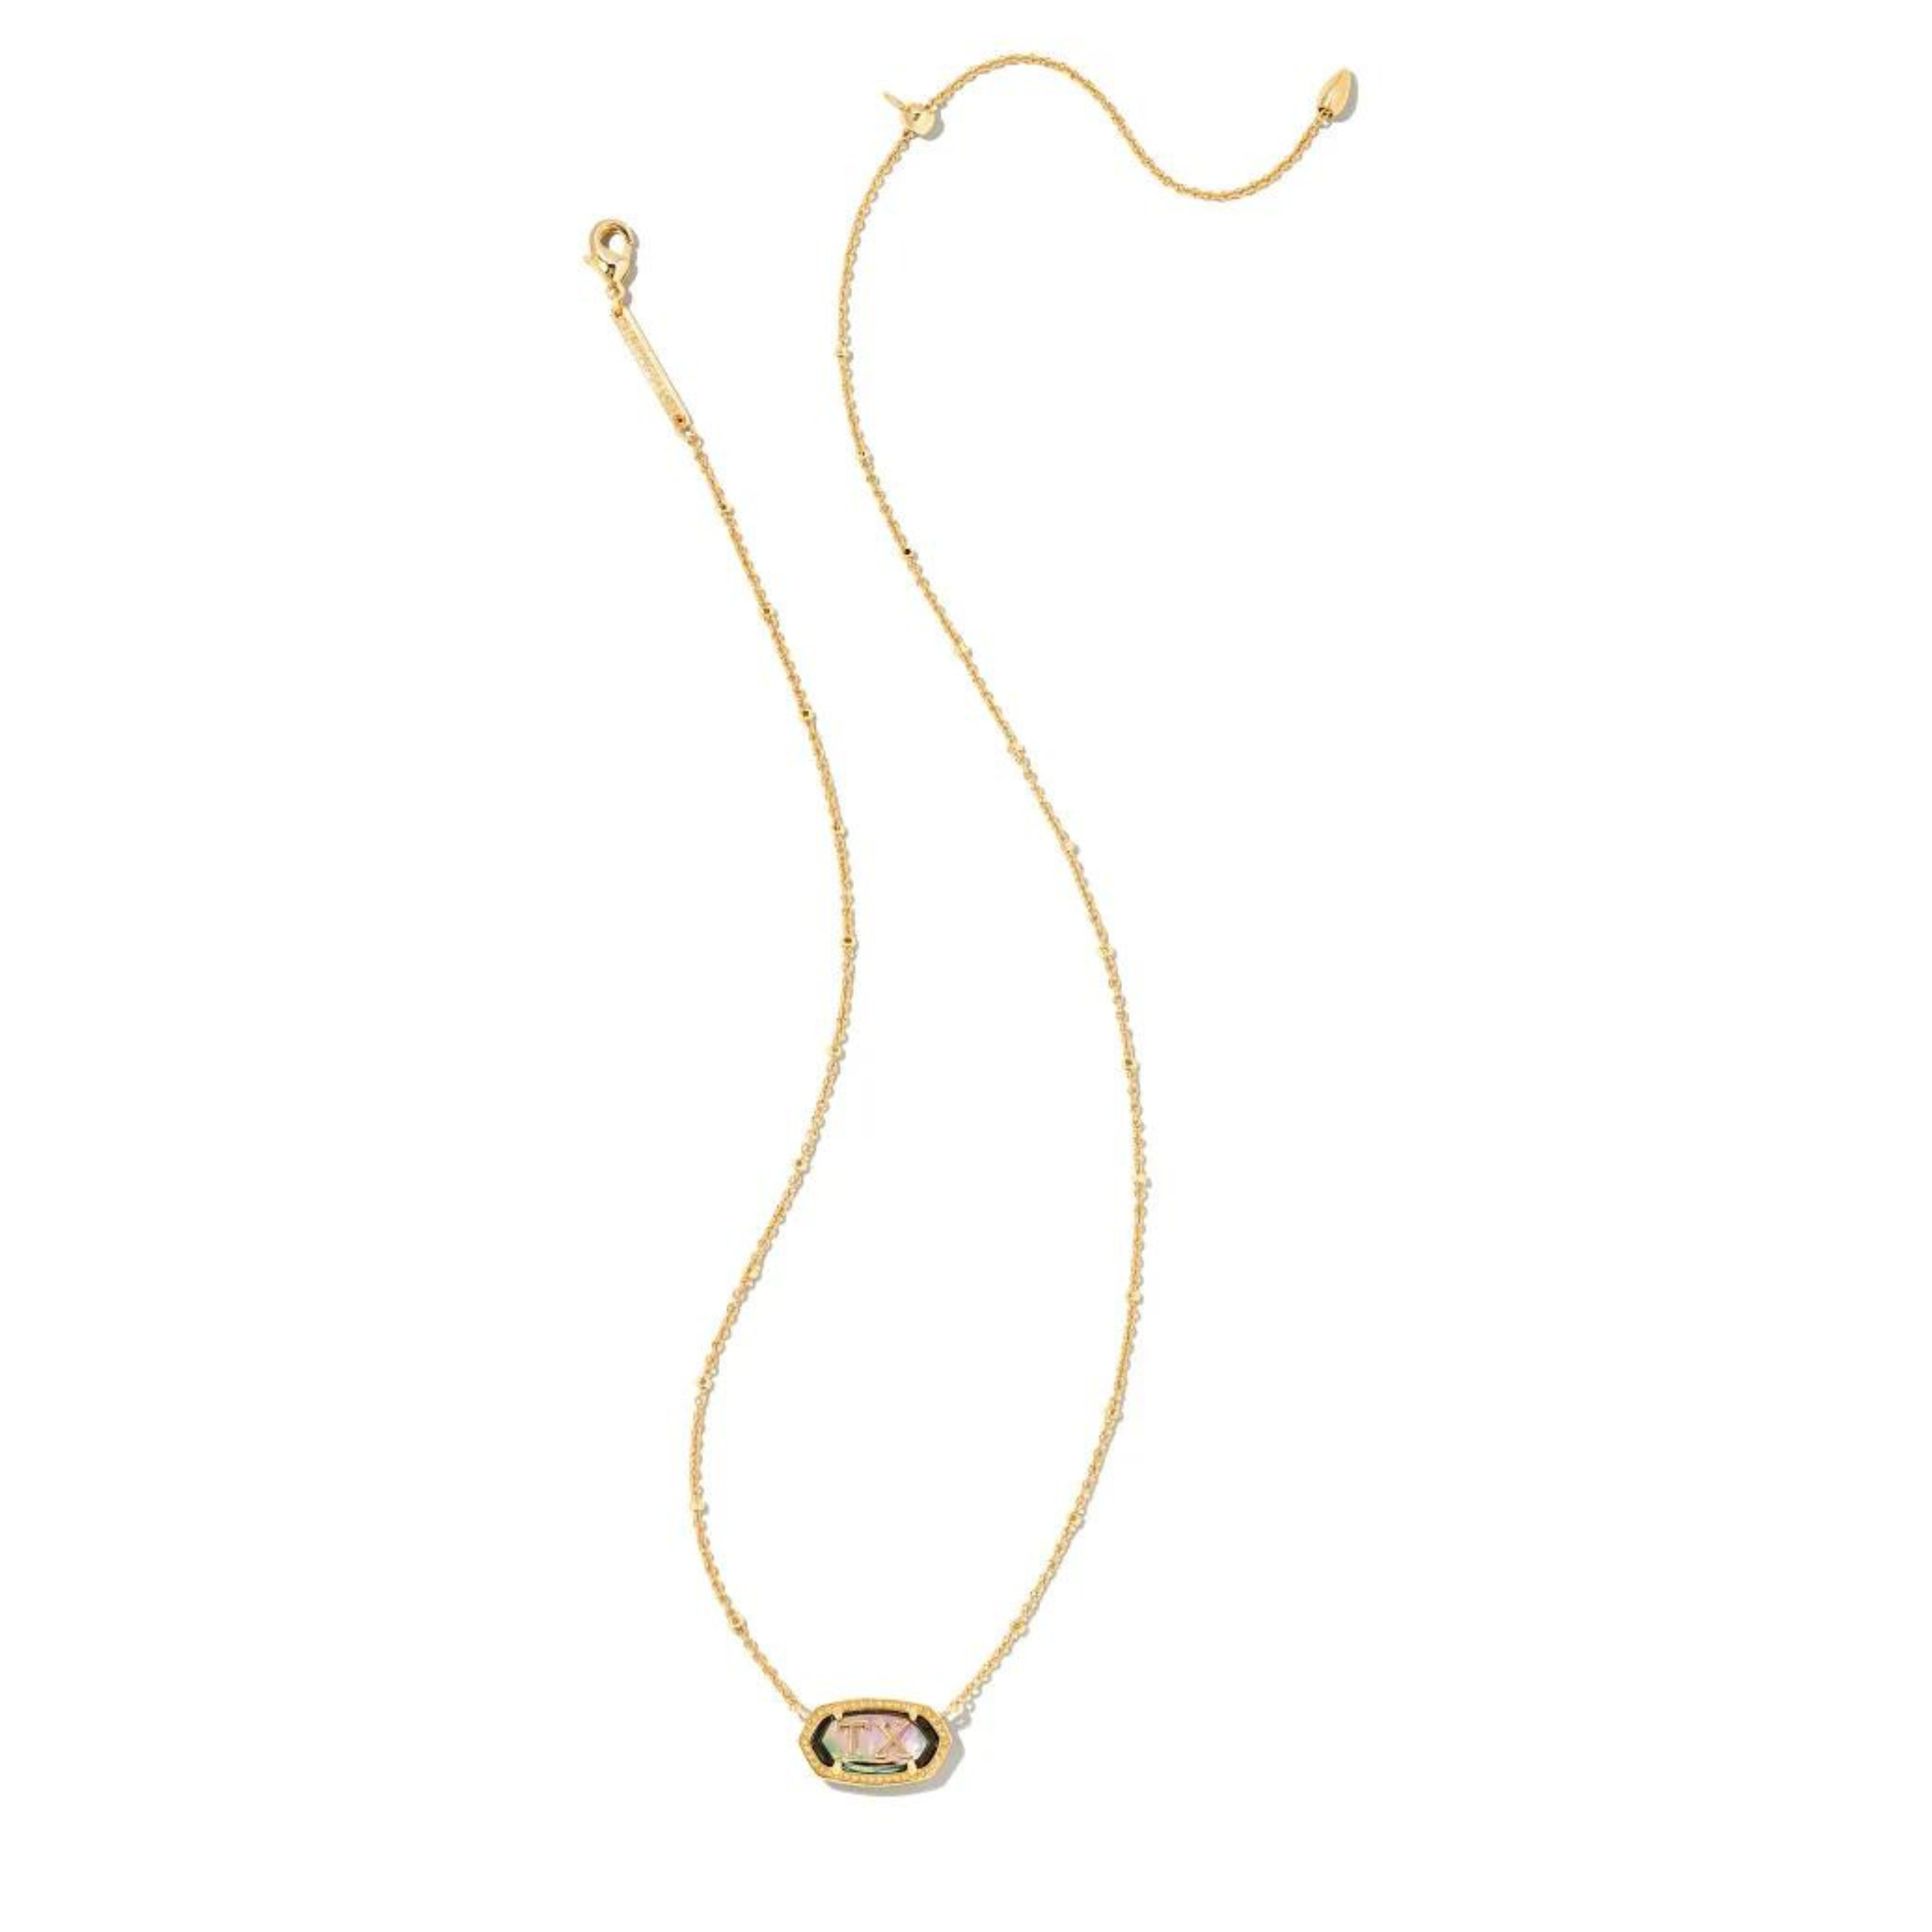 Kendra Scott | Elisa Gold Texas Necklace in Abalone - Giddy Up Glamour Boutique